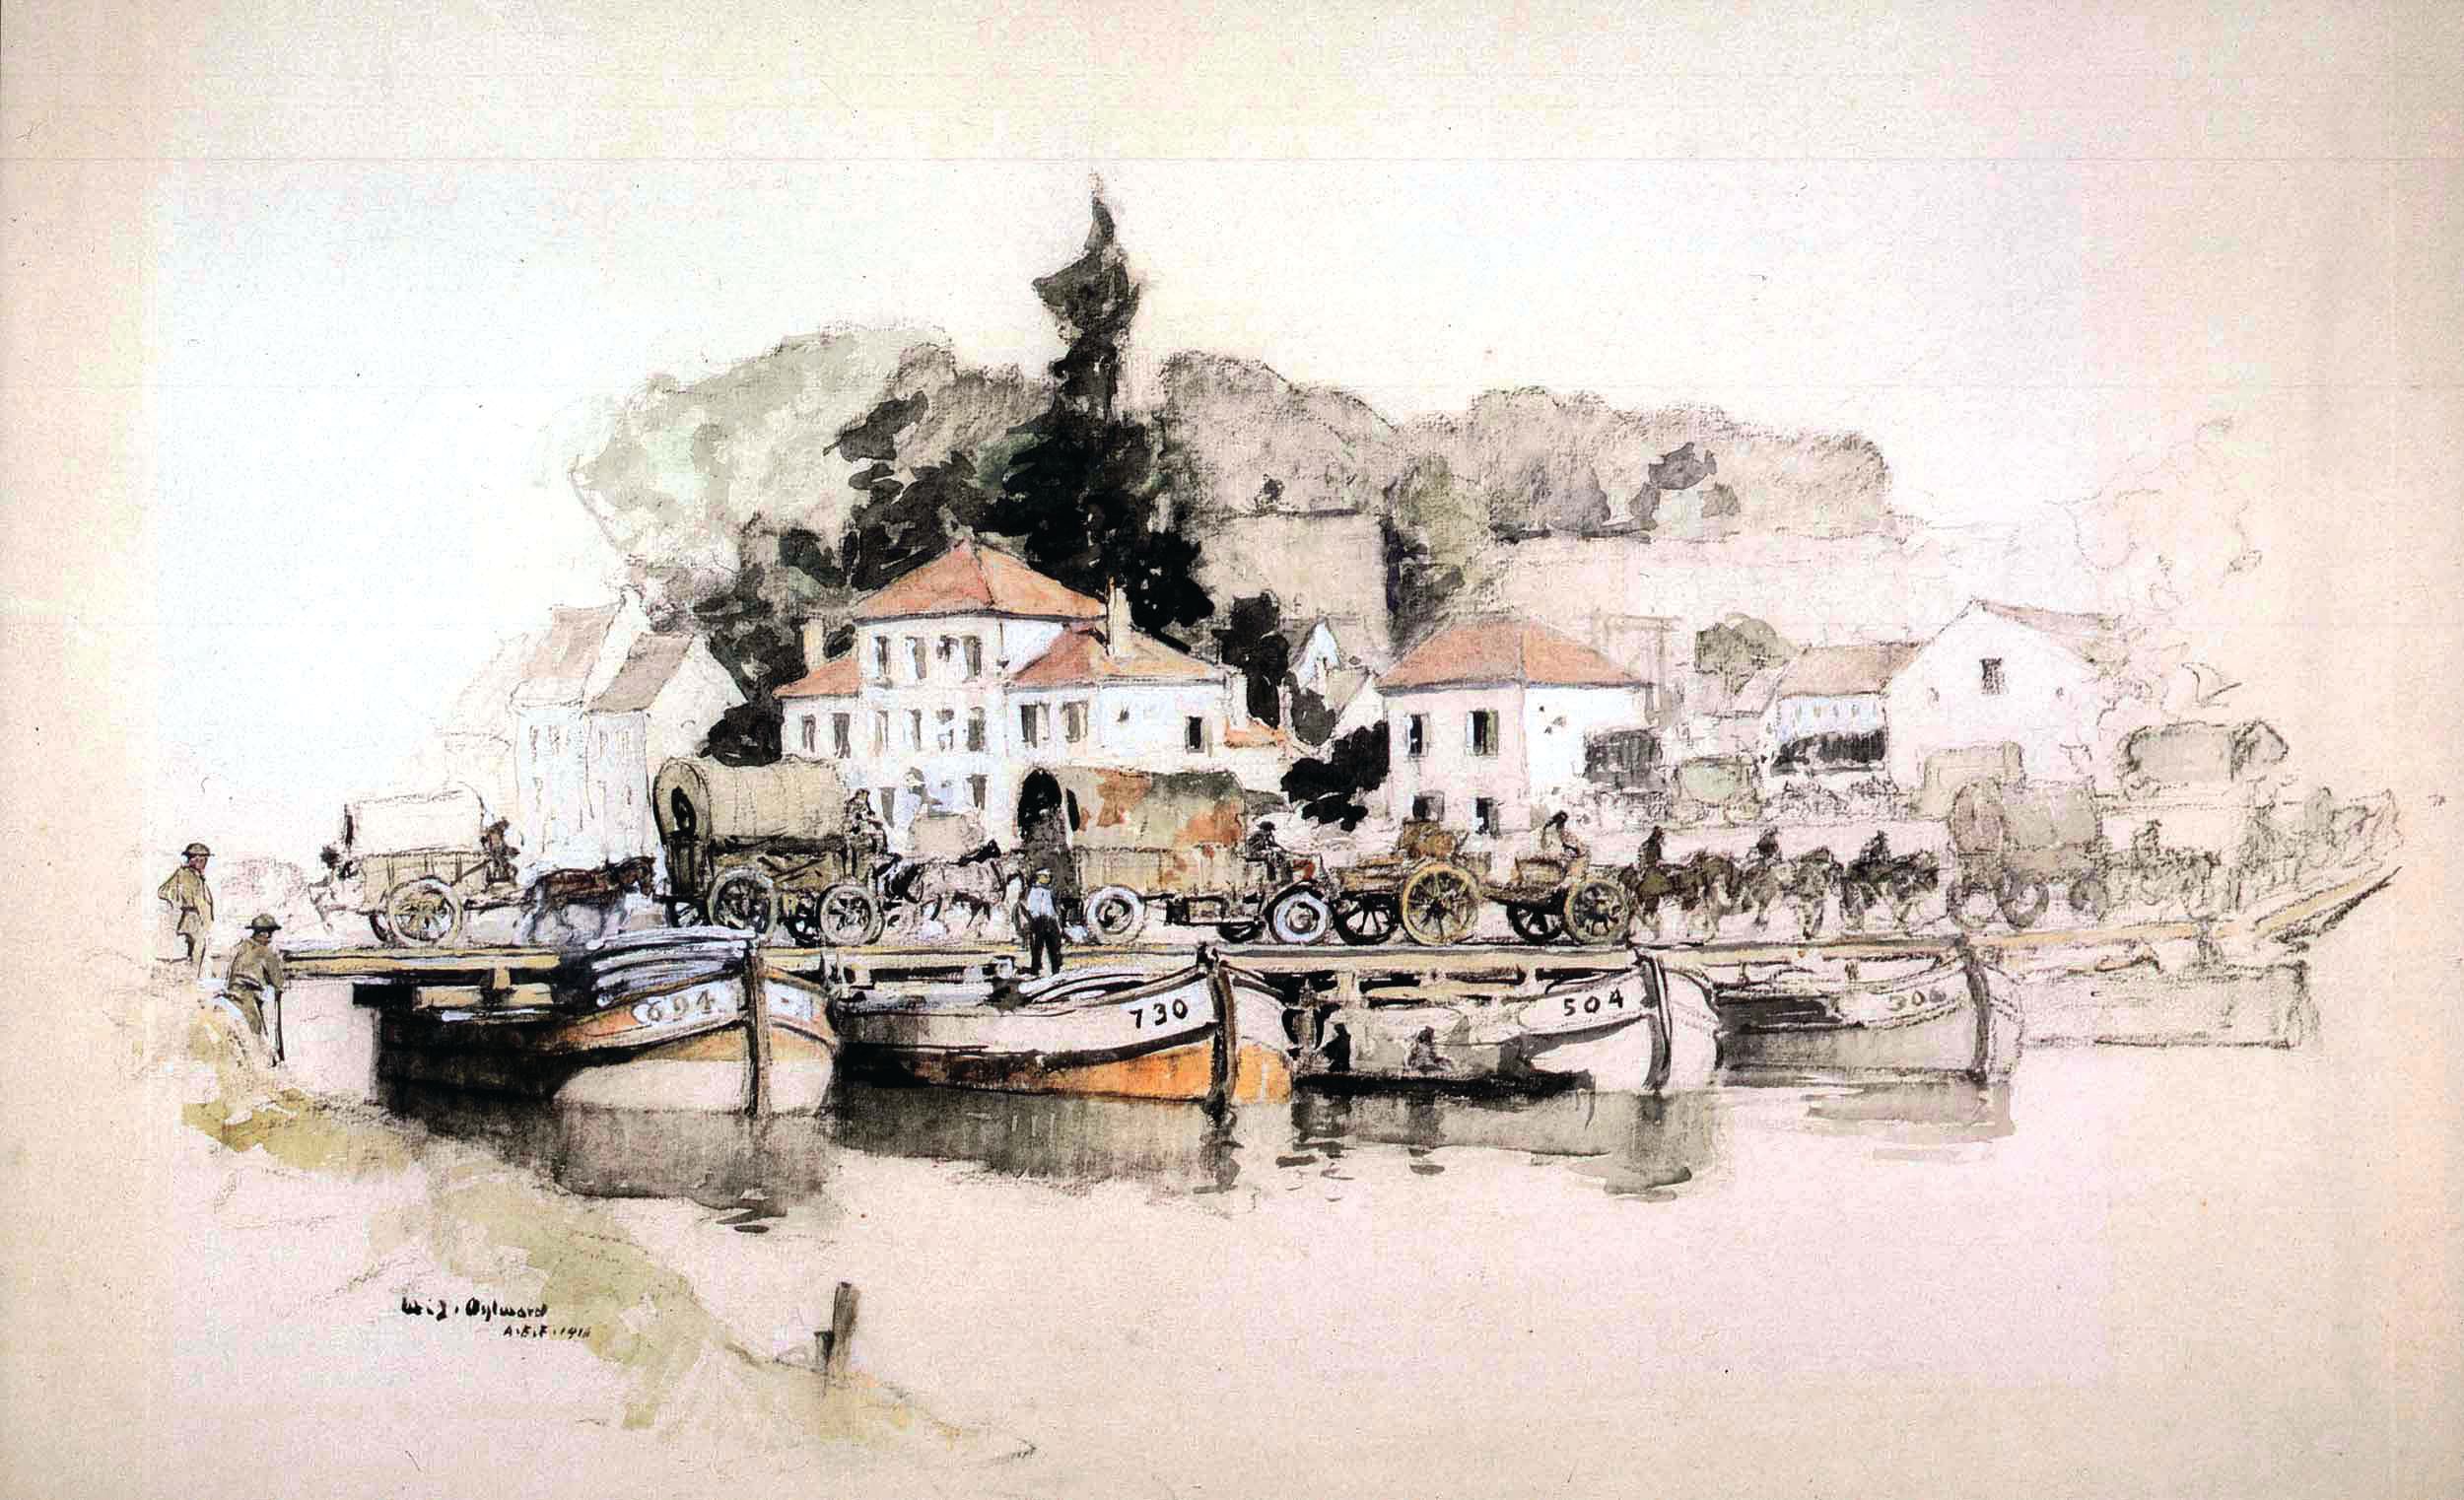 This post-battle painting of Chateau-Thierry by Aylward shows trucks and horse-drawn wagons crossing a pontoon bridge over the Marne.